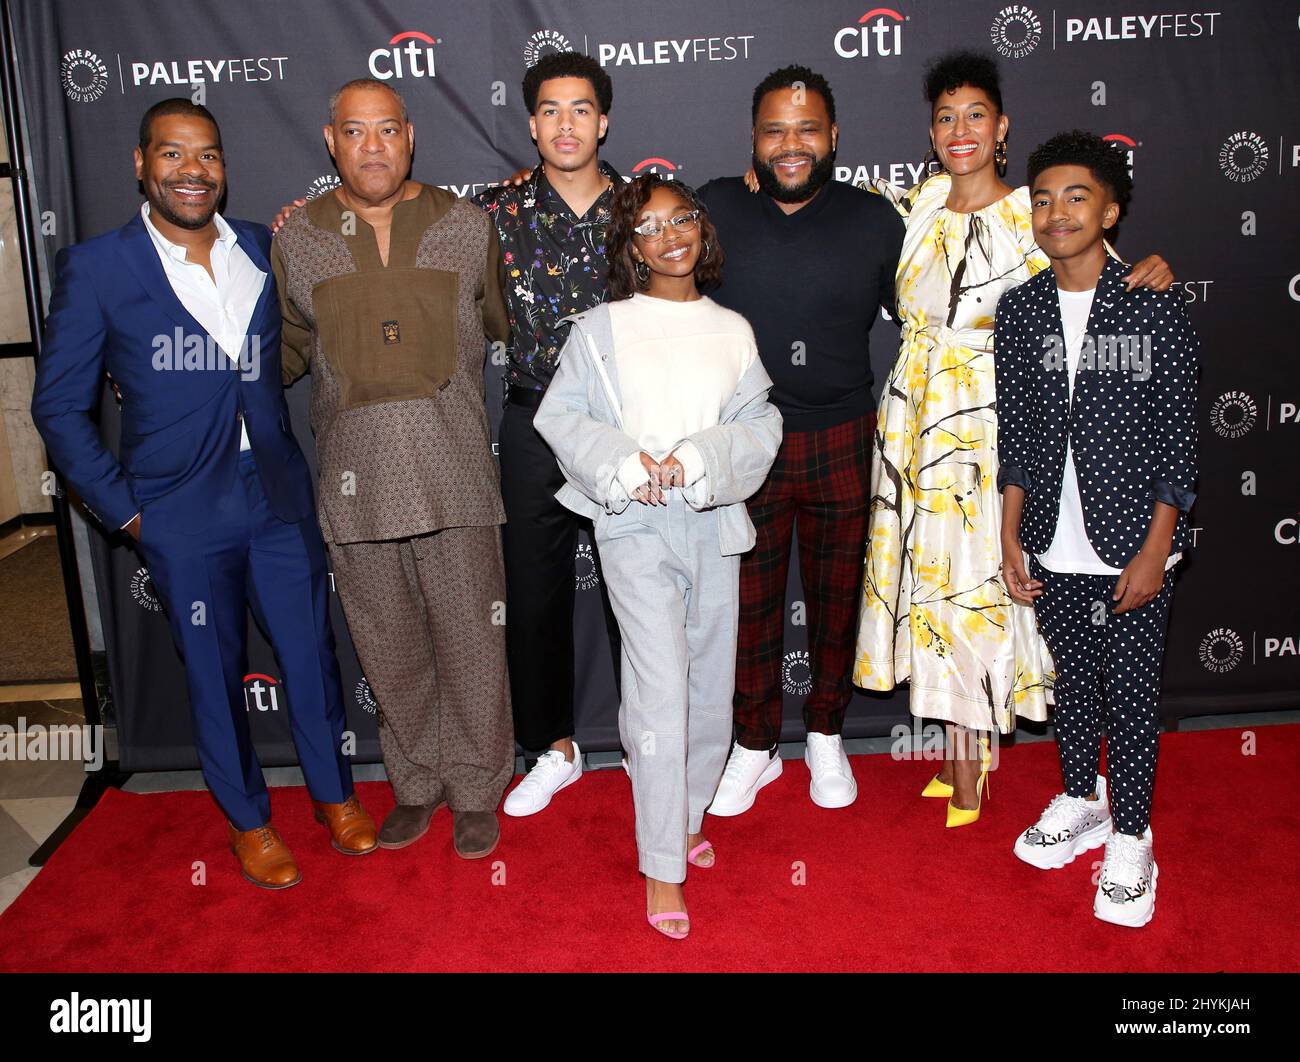 Courtney Lilly, Laurence Fishburne, Marcus Scribner, Marsai Martin, Anthony Anderson, Tracee Ellis Ross & Miles Brown beim PaleyFest NY: Black-ish am 13. Oktober 2019 im Paley Center for Media in New York City, New York. Stockfoto